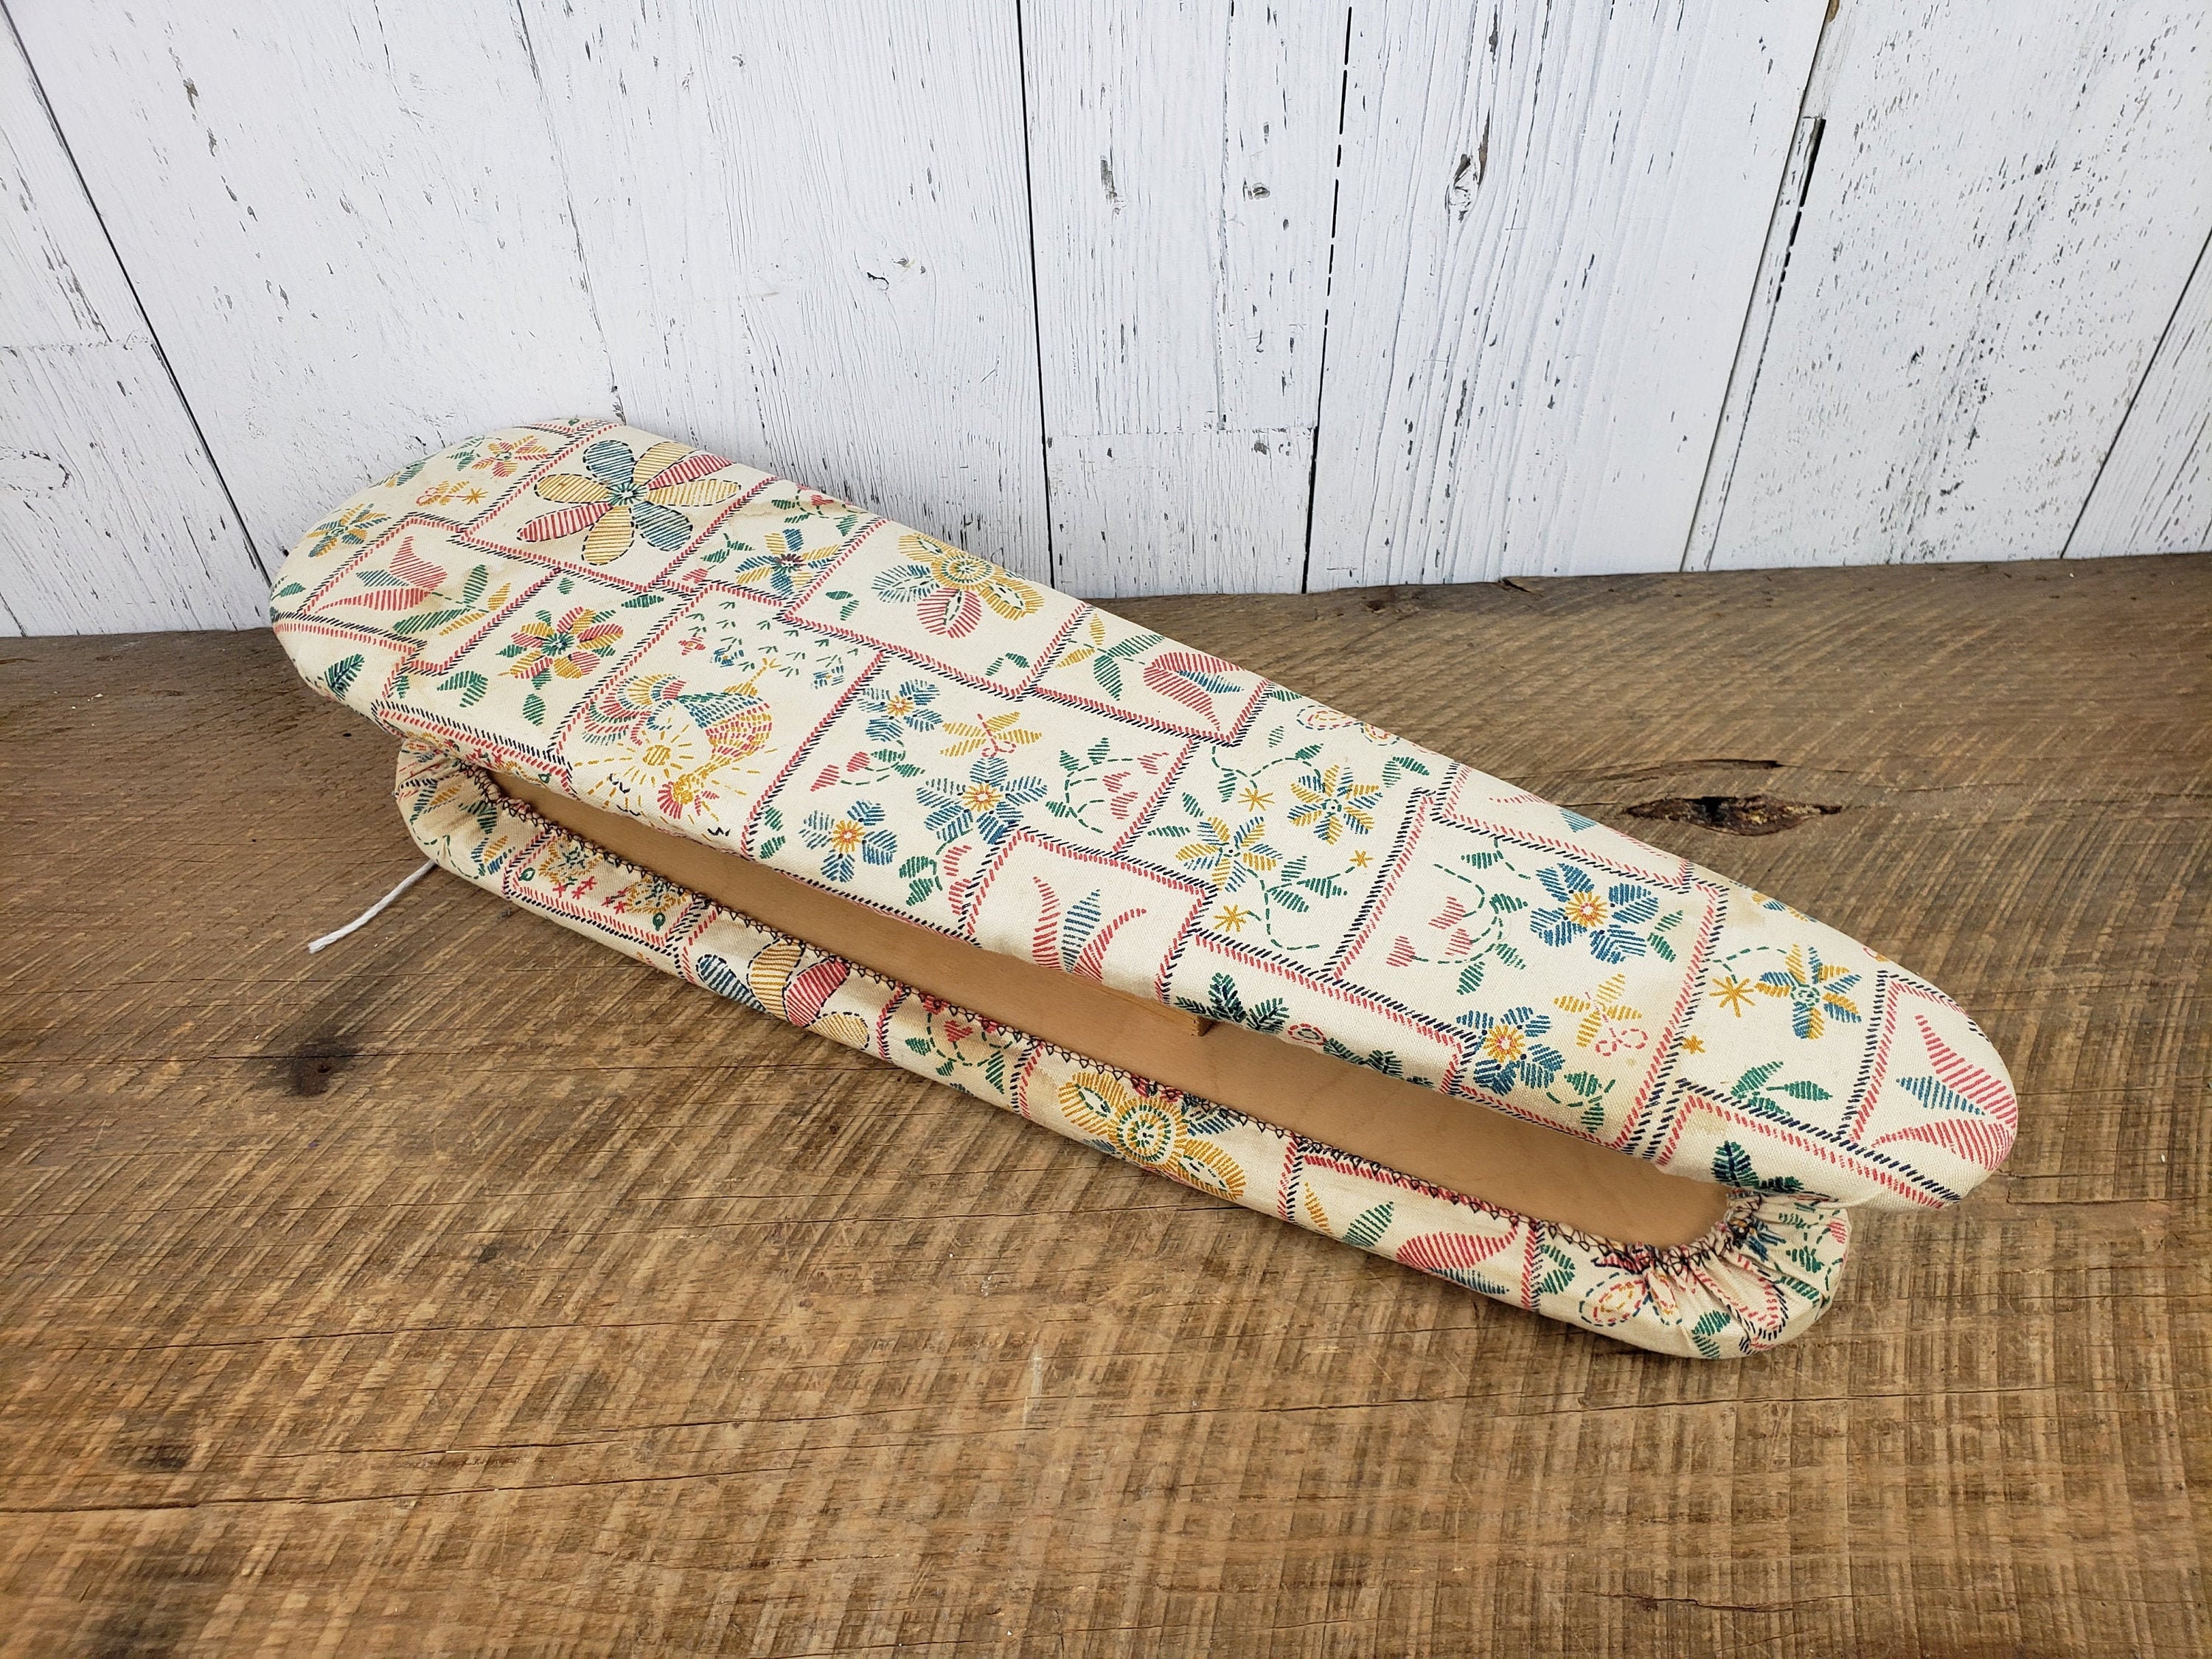 Ironing Boards - Sleeve Ironing Board Covers By Sullivans